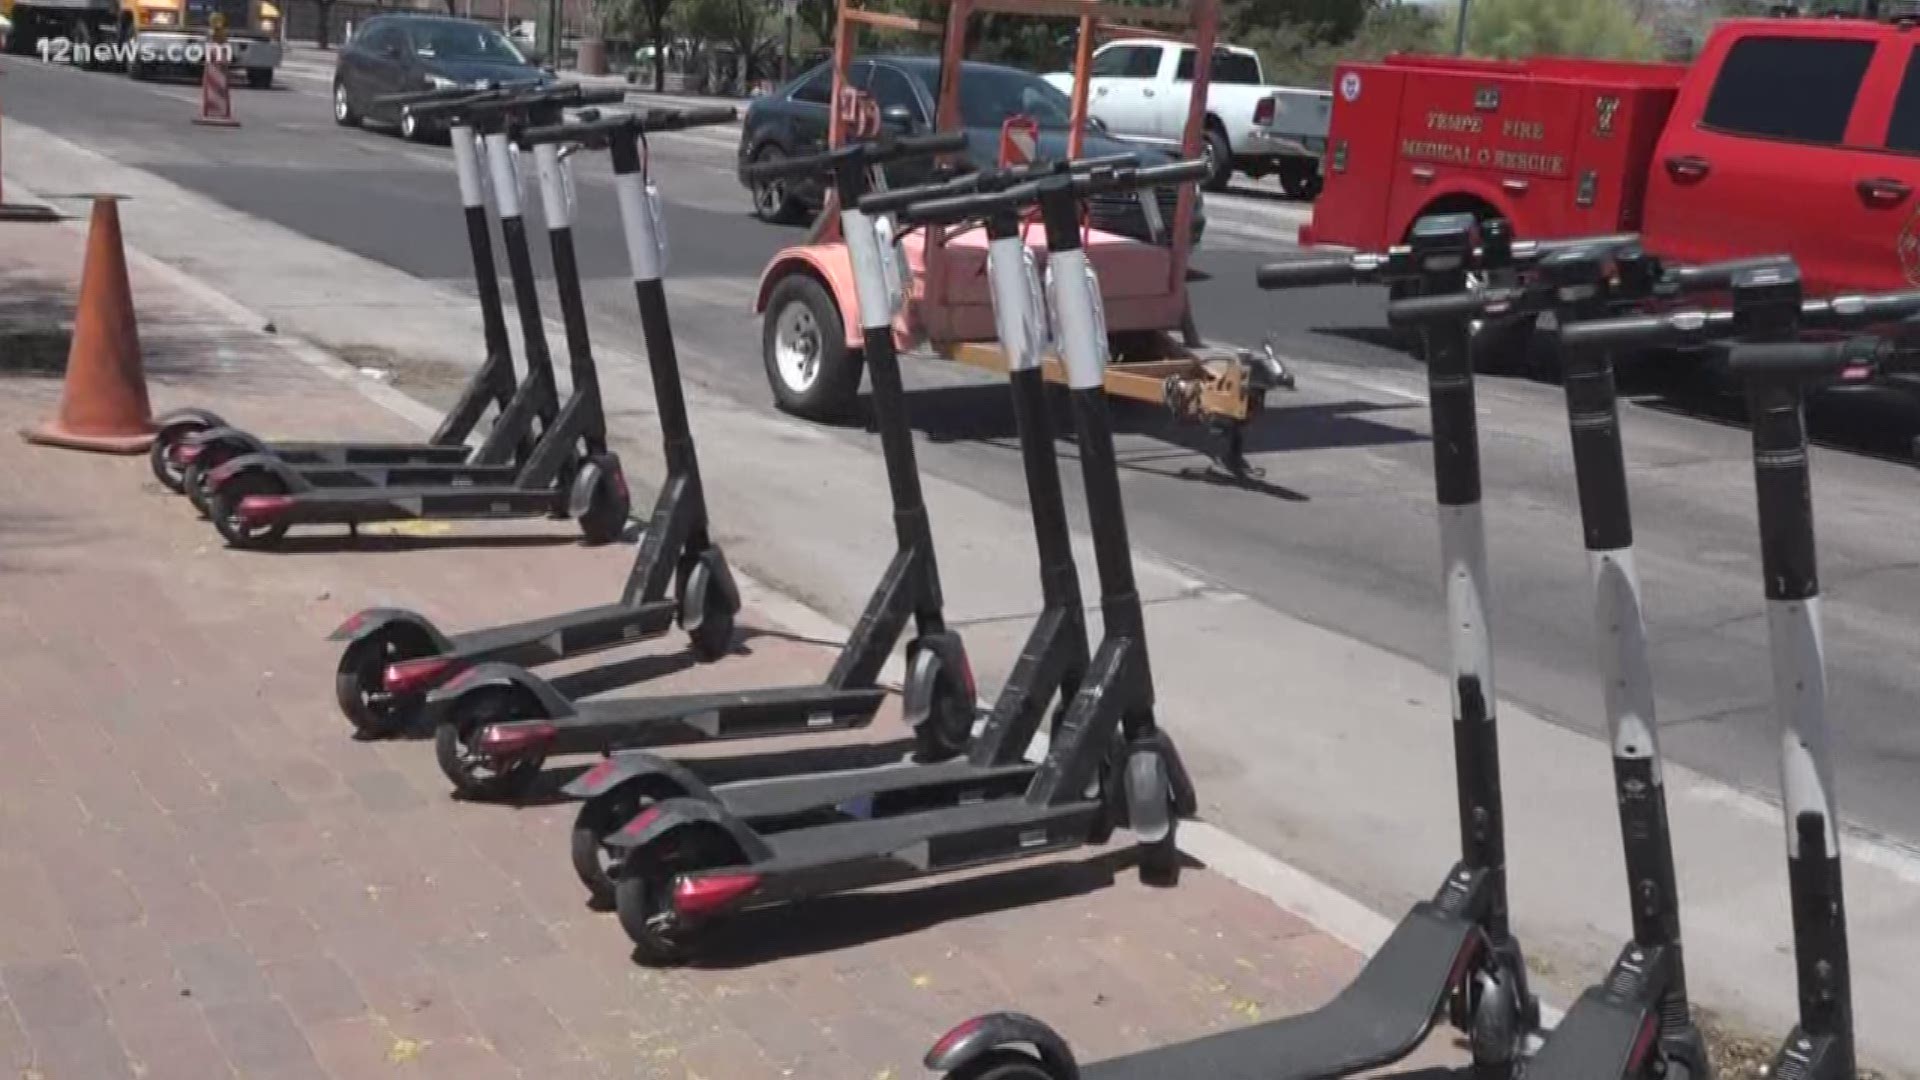 Electric scooters are everywhere in the Valley and almost no one is wearing a helmet while riding one. A Tempe man is in critical condition after being hit by a car while riding an e-scooter Wednesday. He was not wearing a helmet.